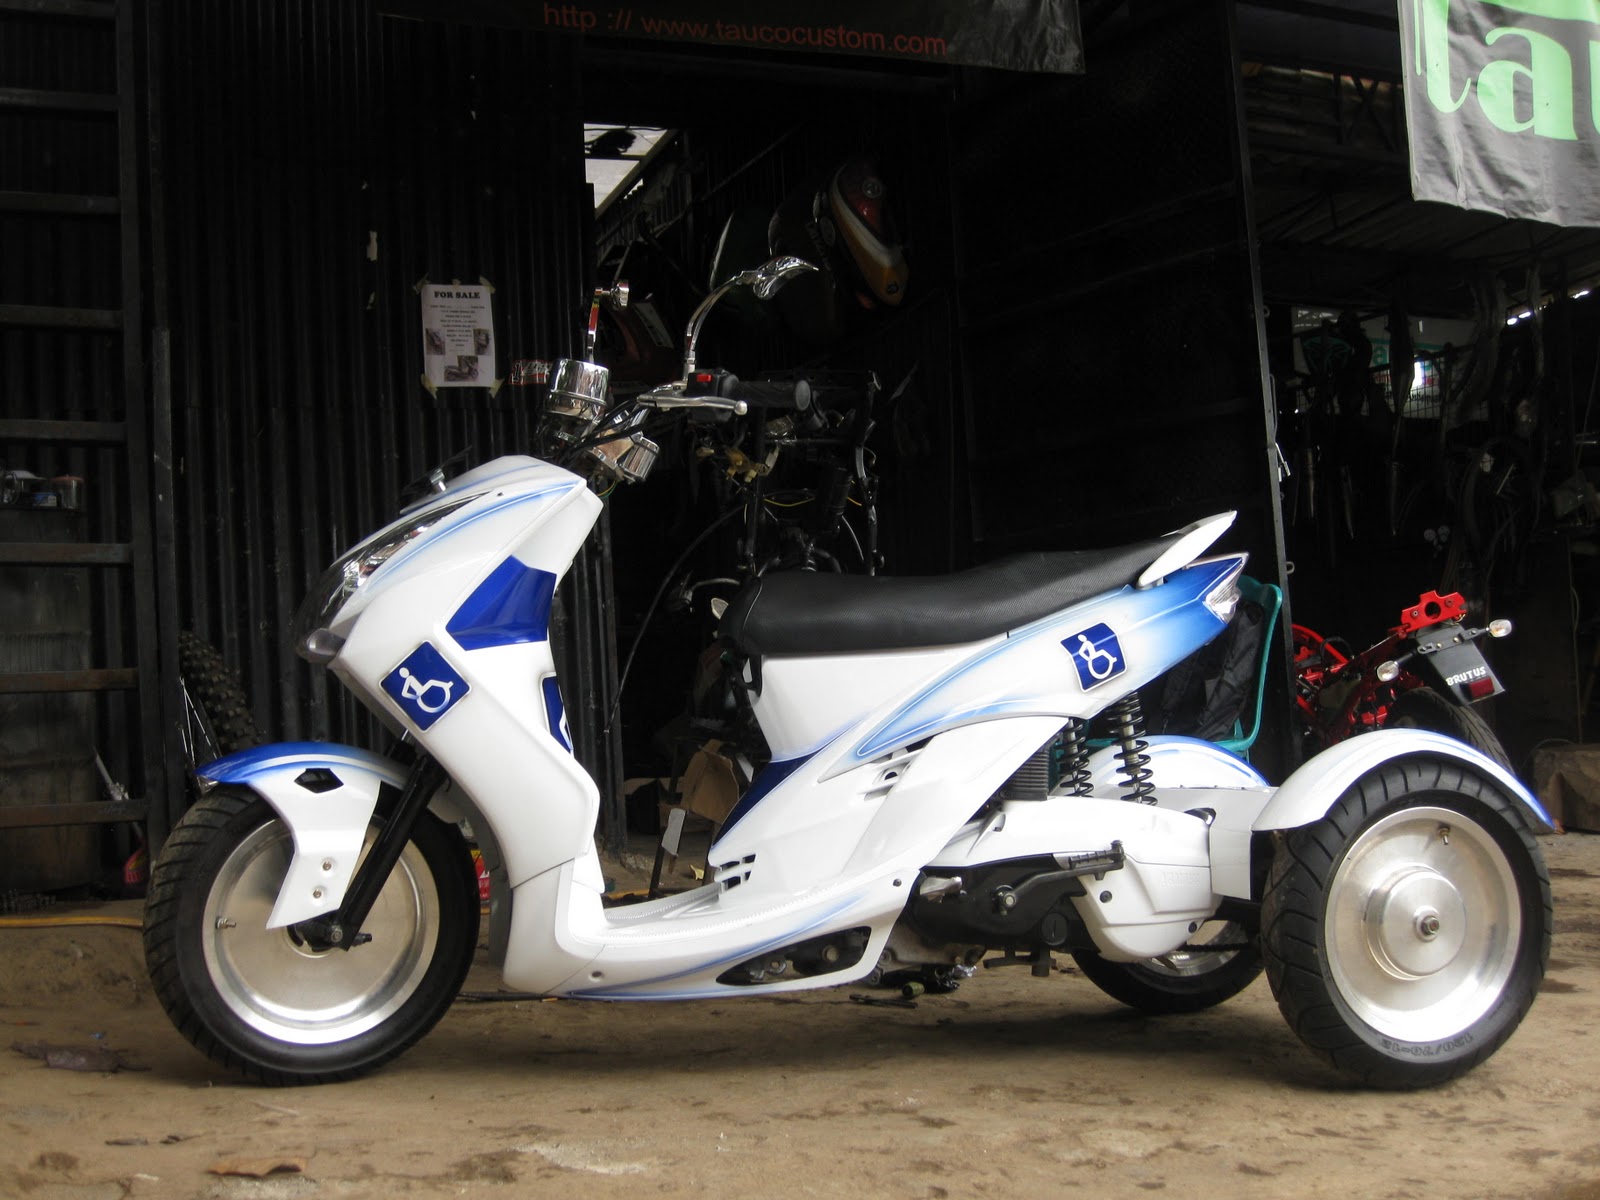 What Is Your Car And Motorcycle Yamaha Mio And Mio Soul